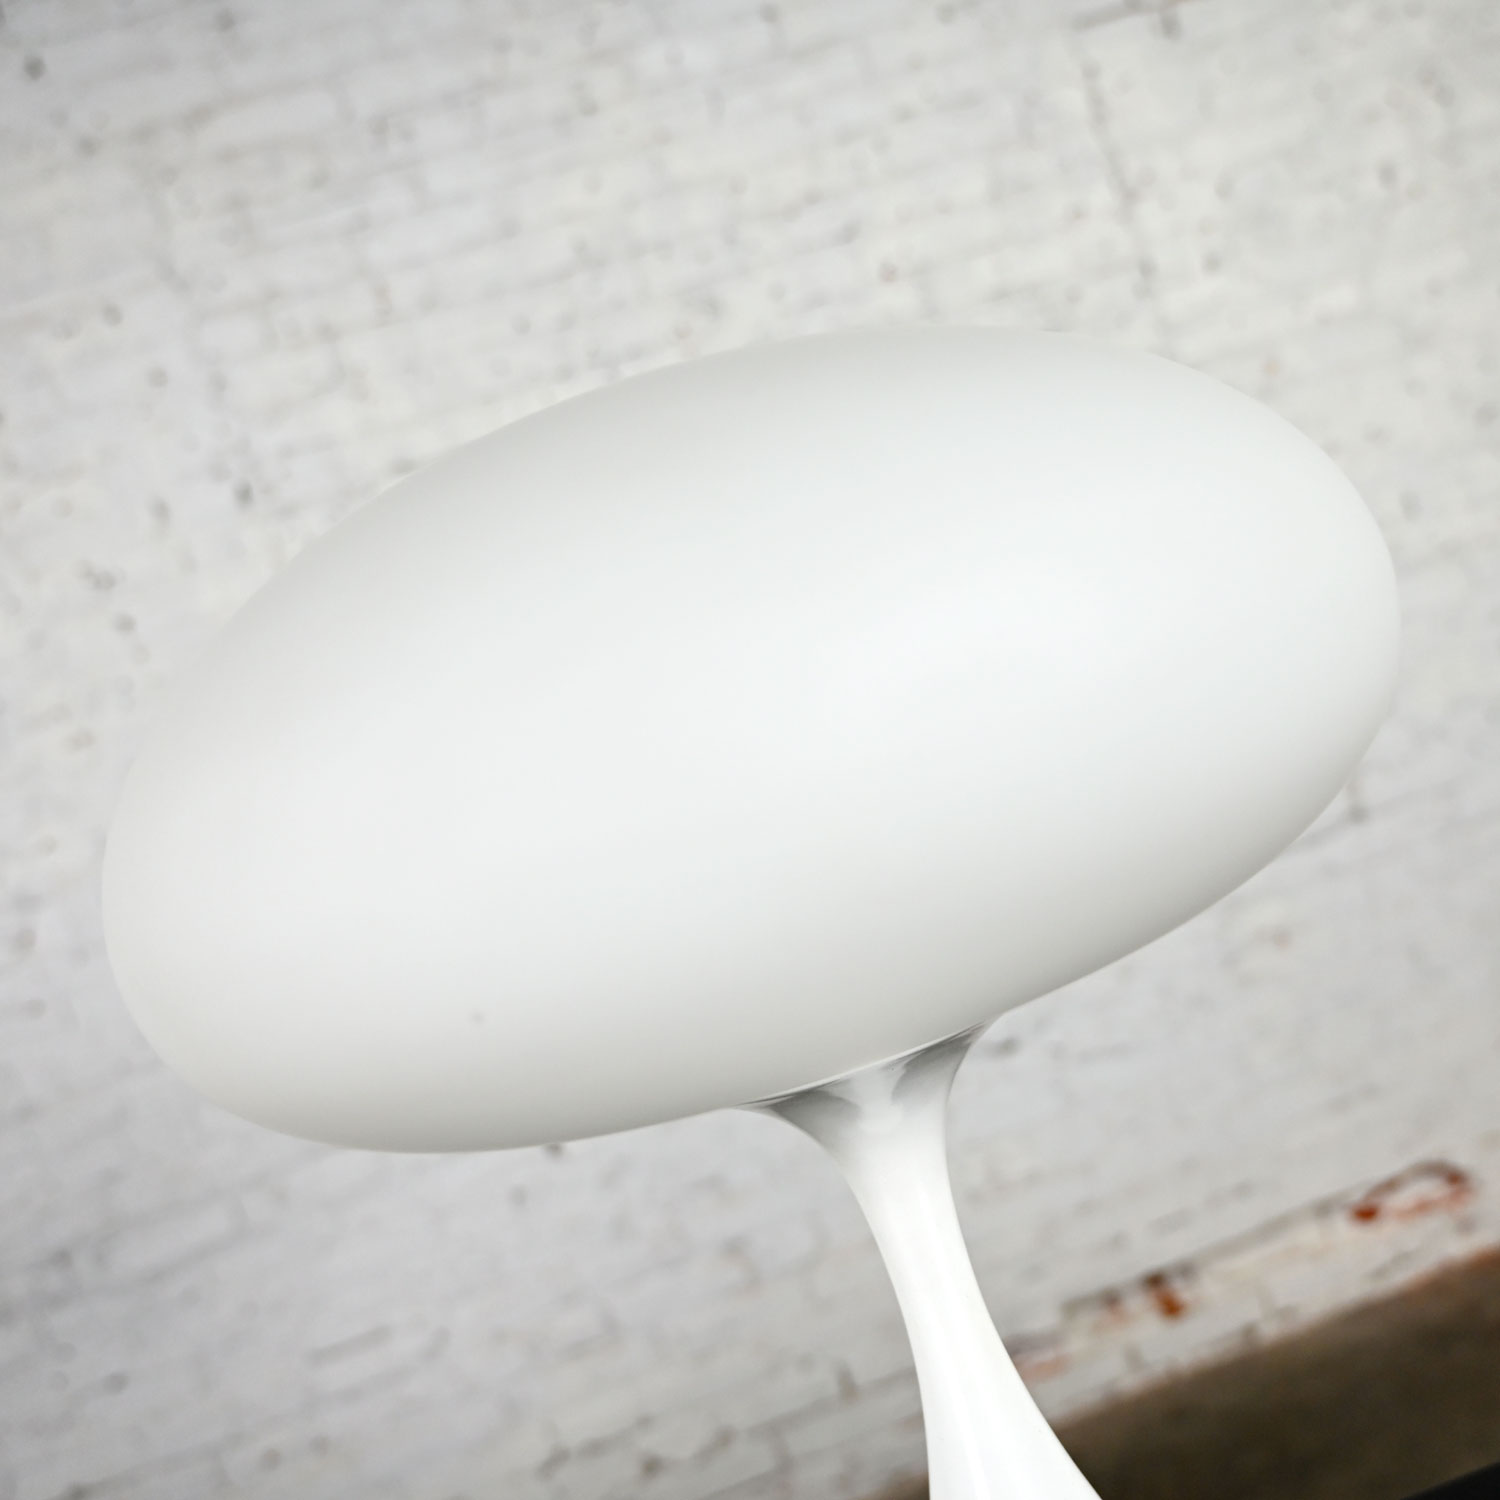 Vintage MCM Table Lamp with Frosted White Glass Mushroom Shade by Laurel Lamp Company